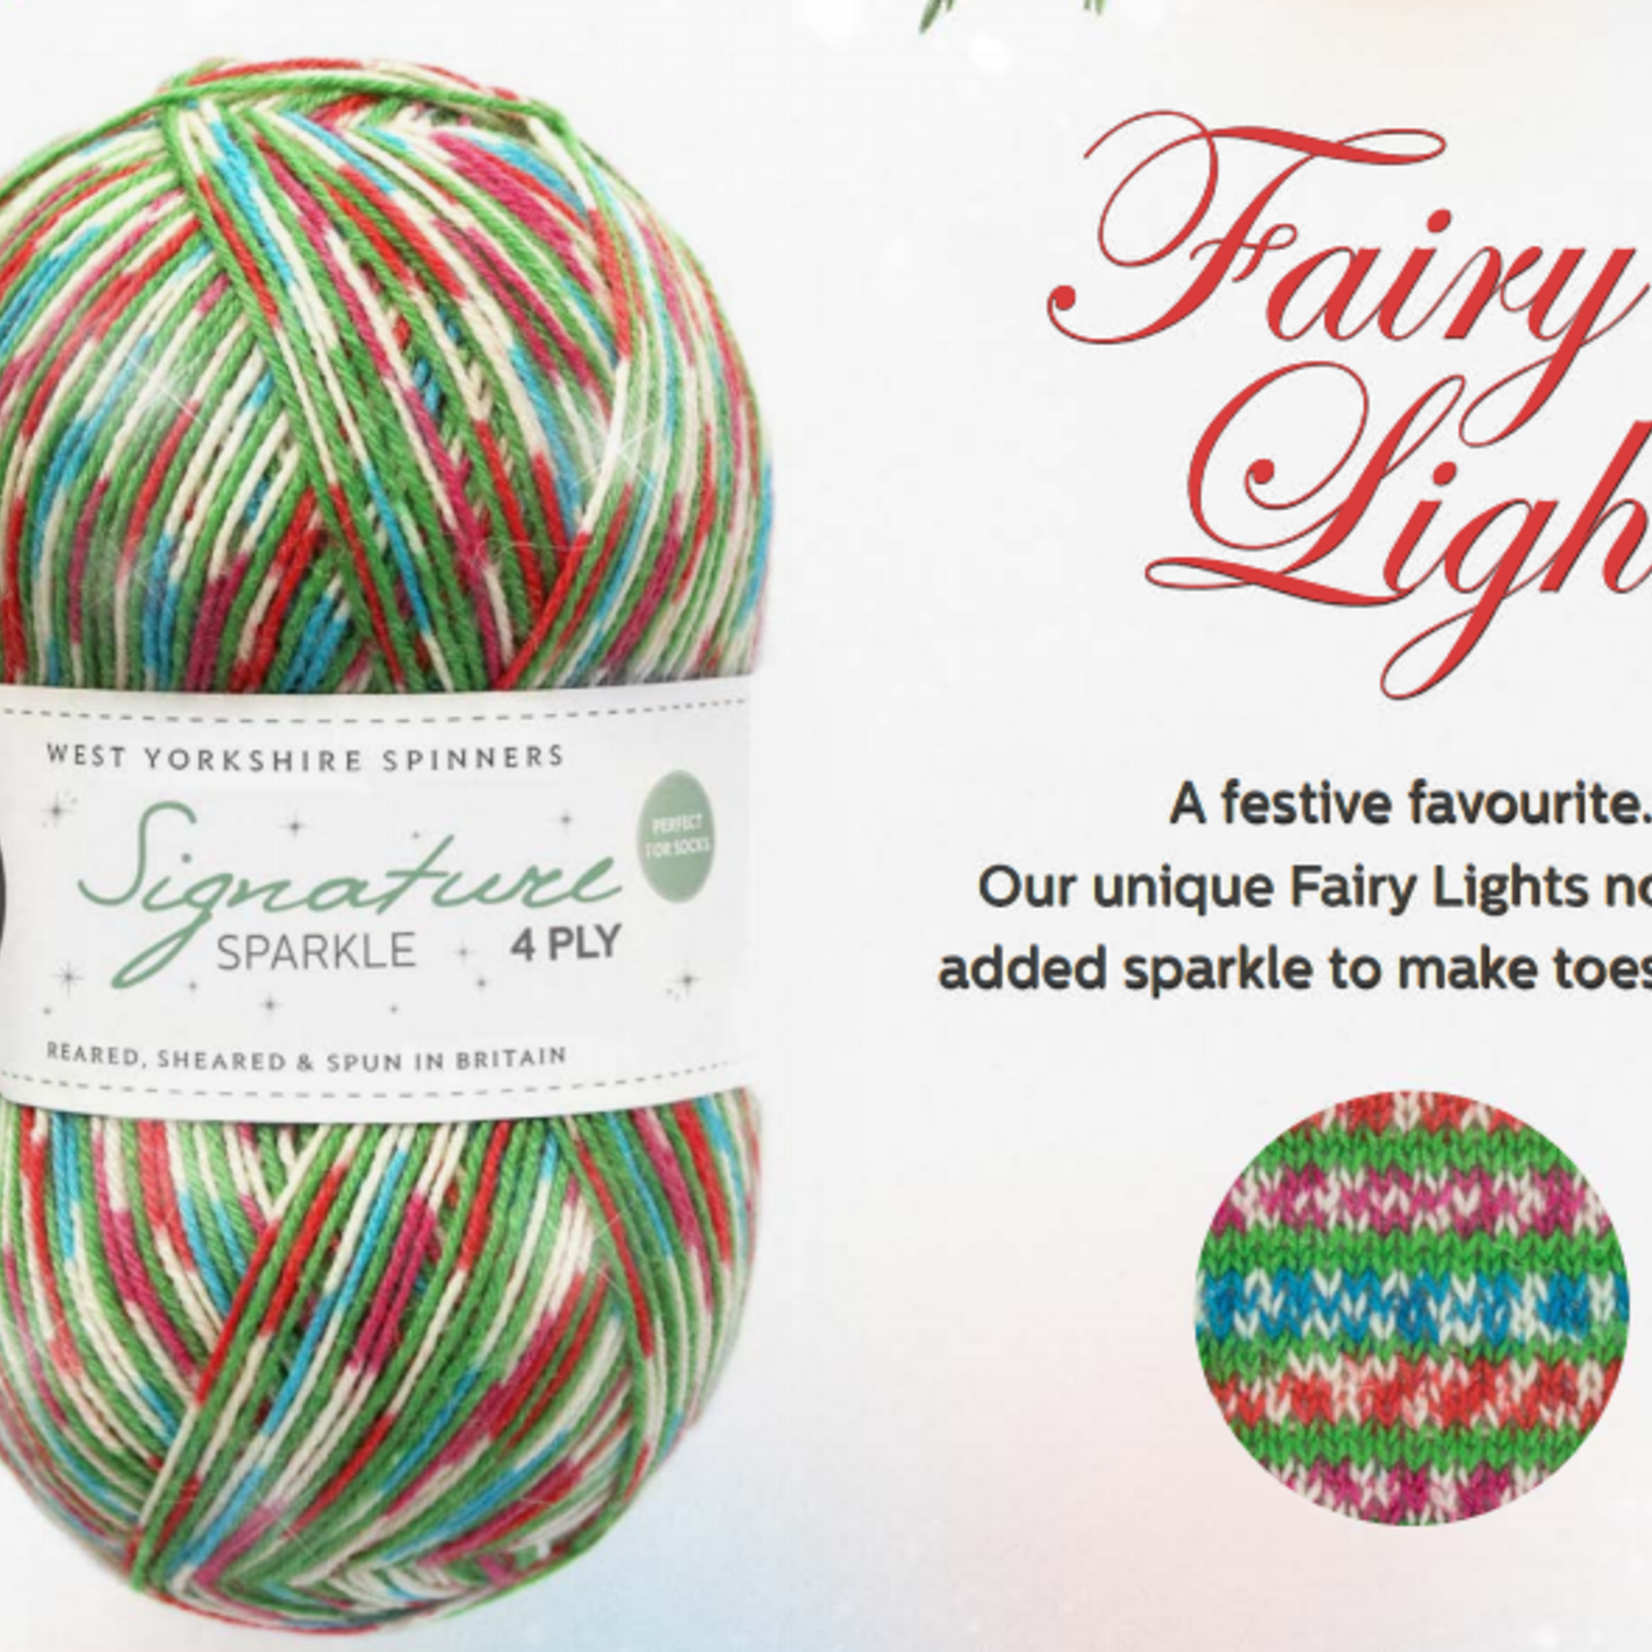 West Yorkshire Spinners Christmas Special Edition Sock Yarns by West Yorkshire Spinners